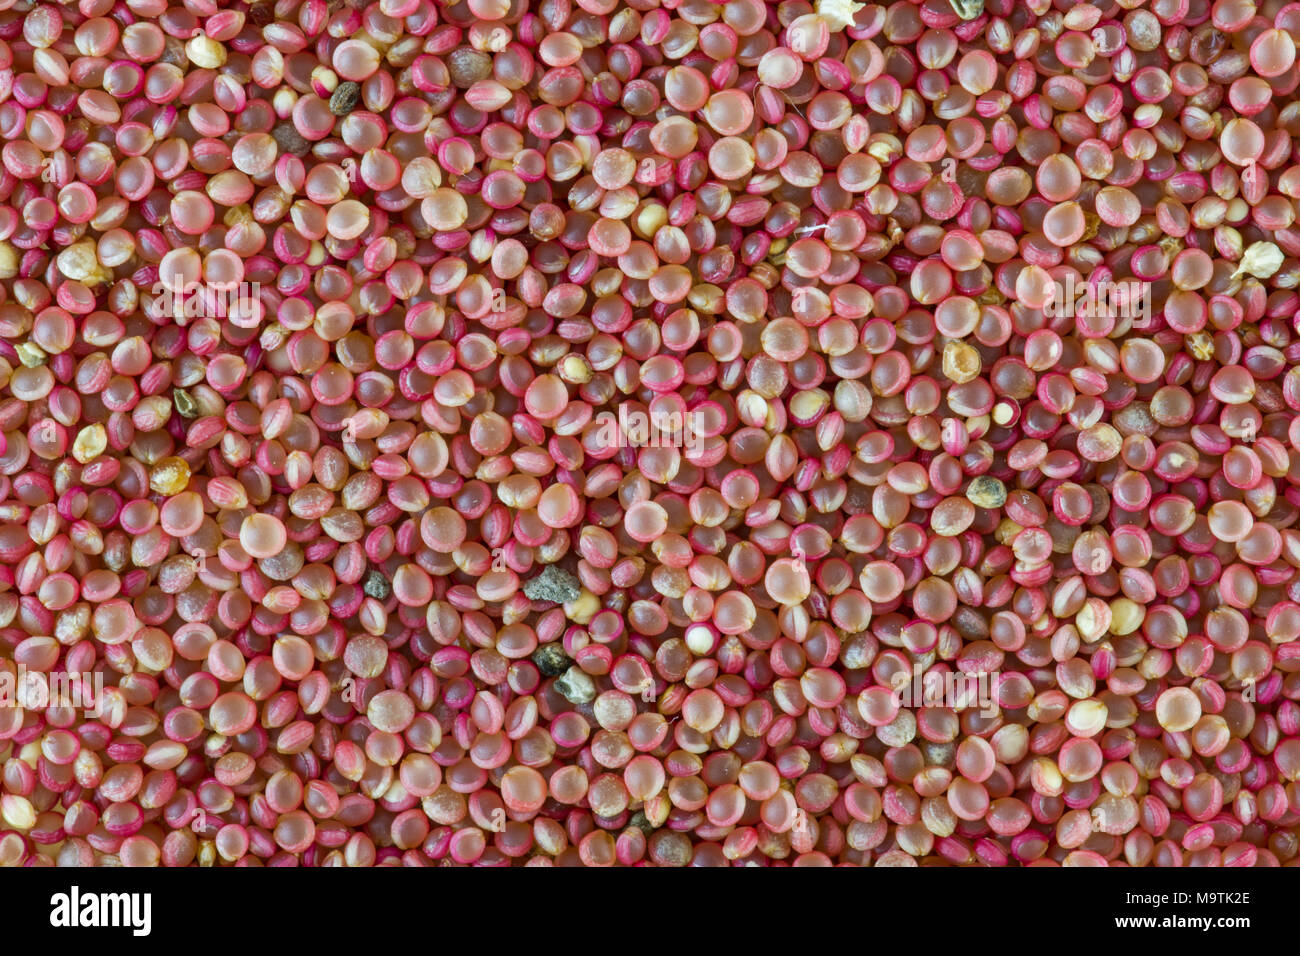 close up of red amaranth grain Stock Photo